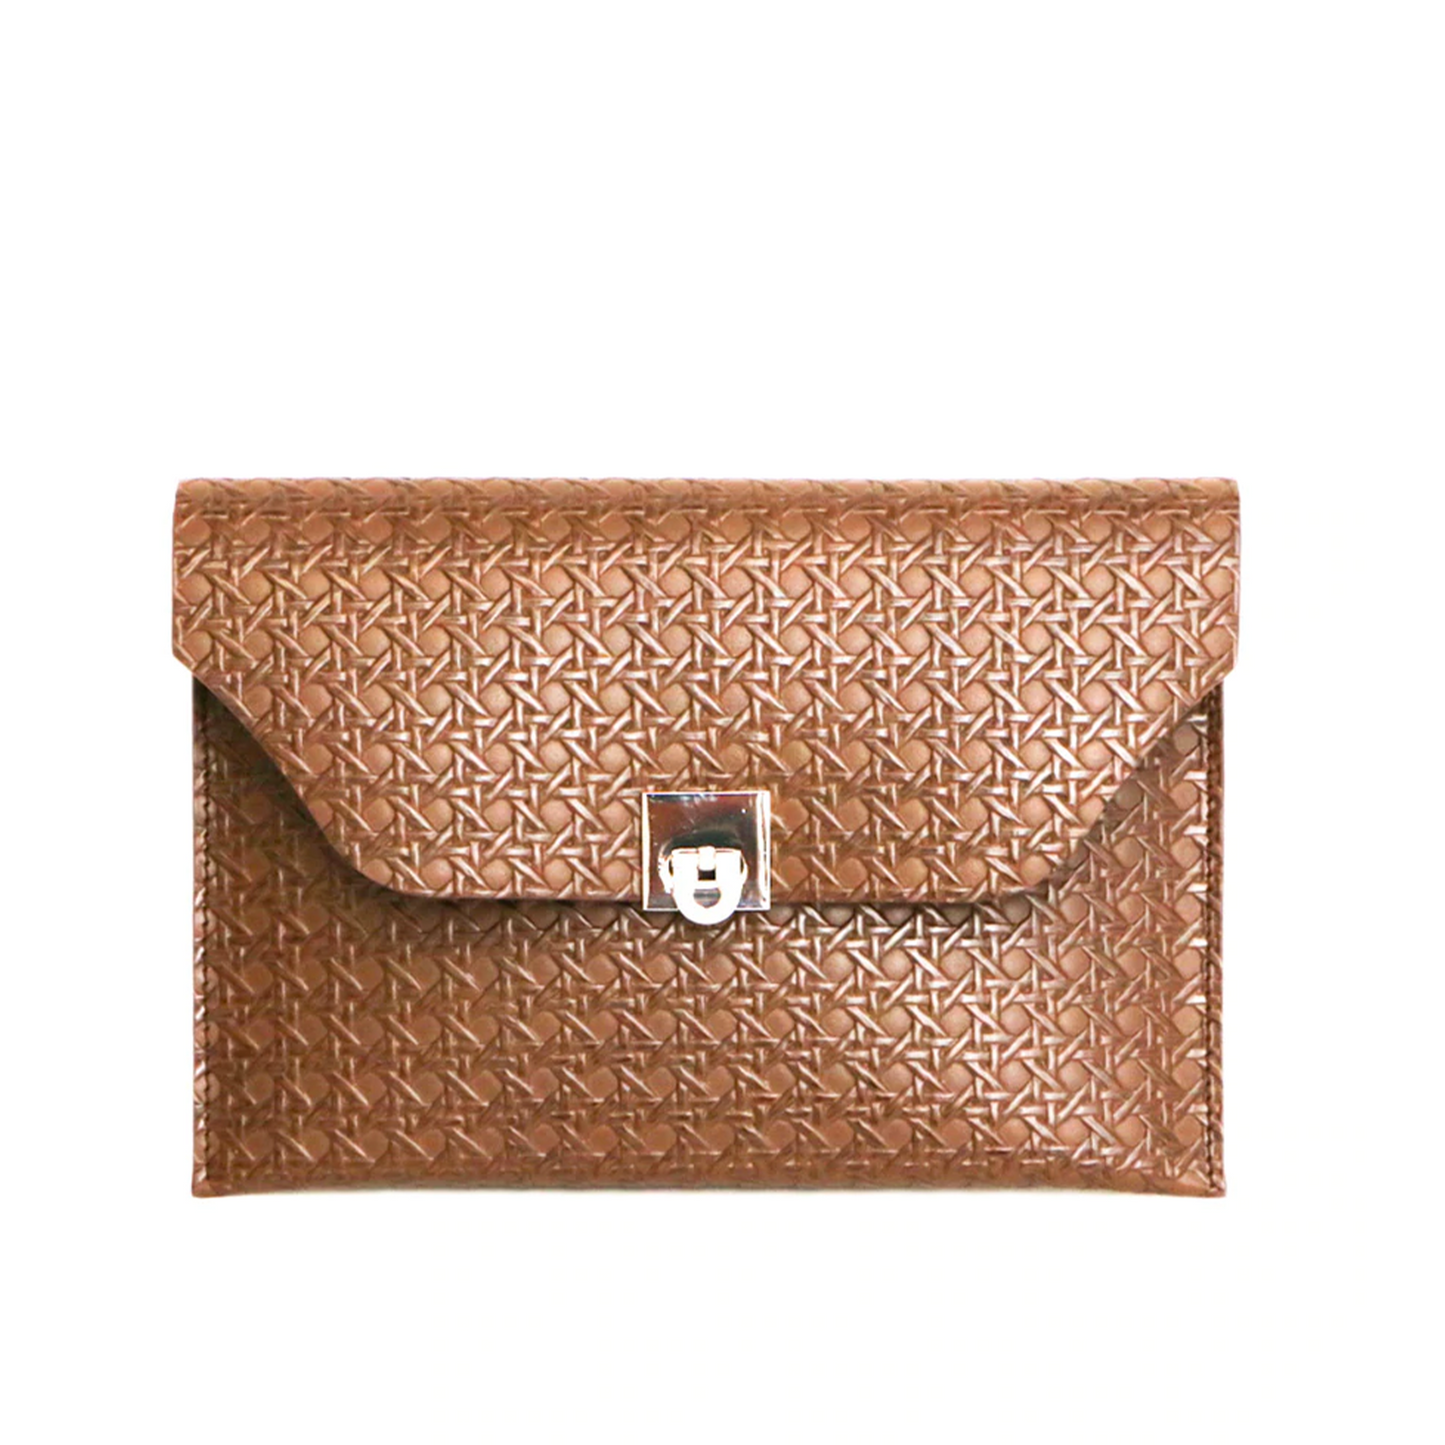 Manakel Embossed Pouch